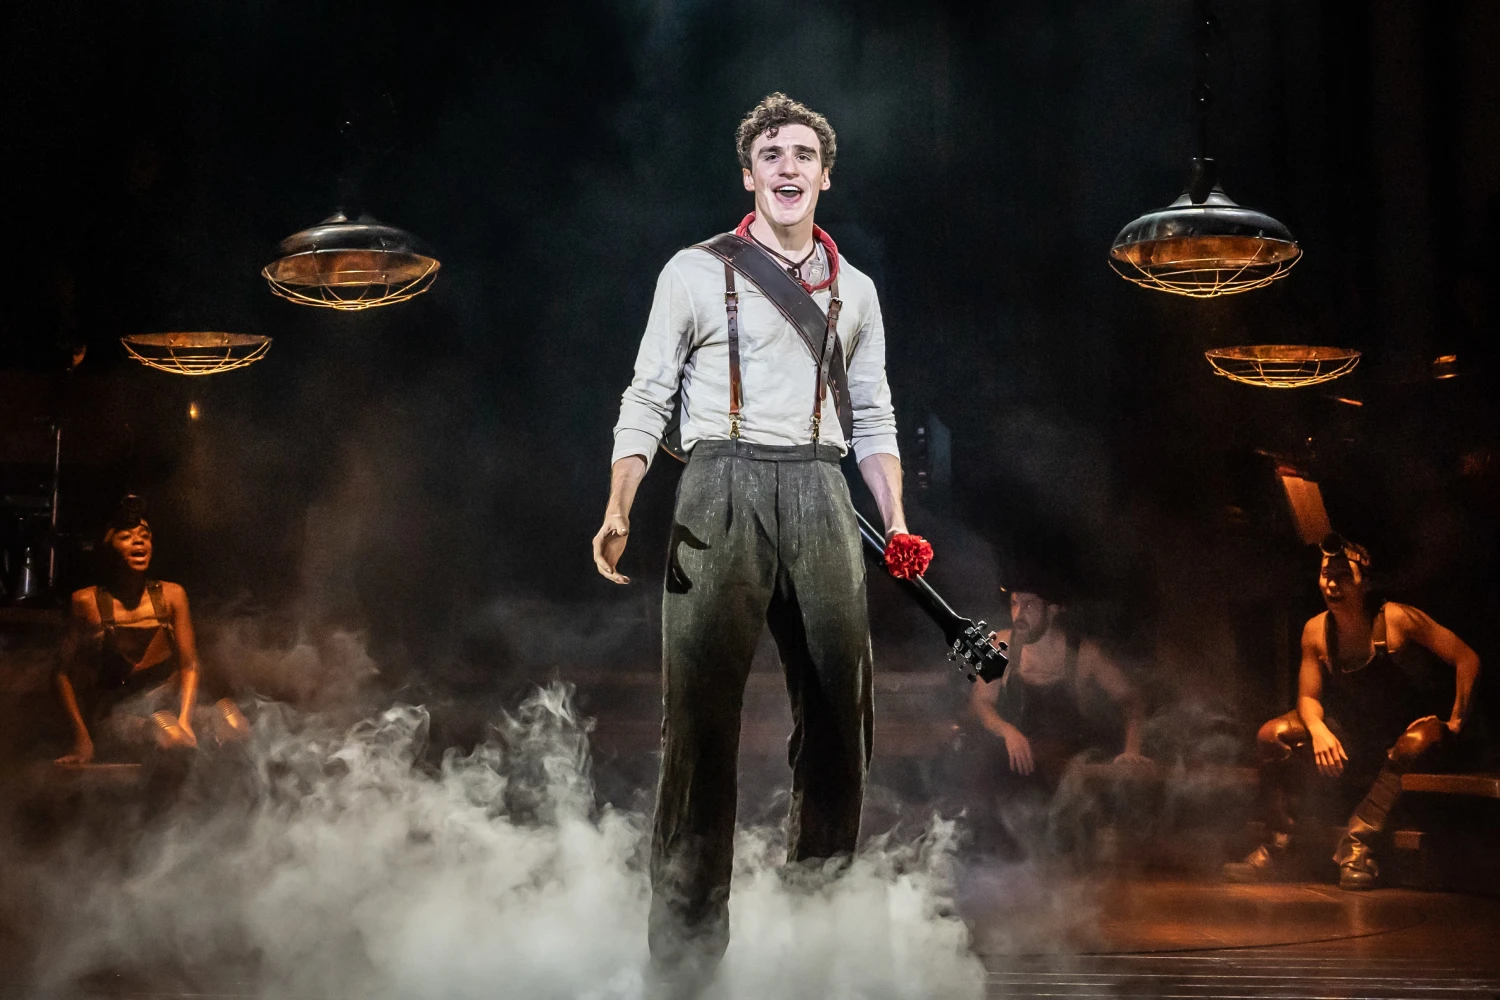 Hadestown: What to expect - 5